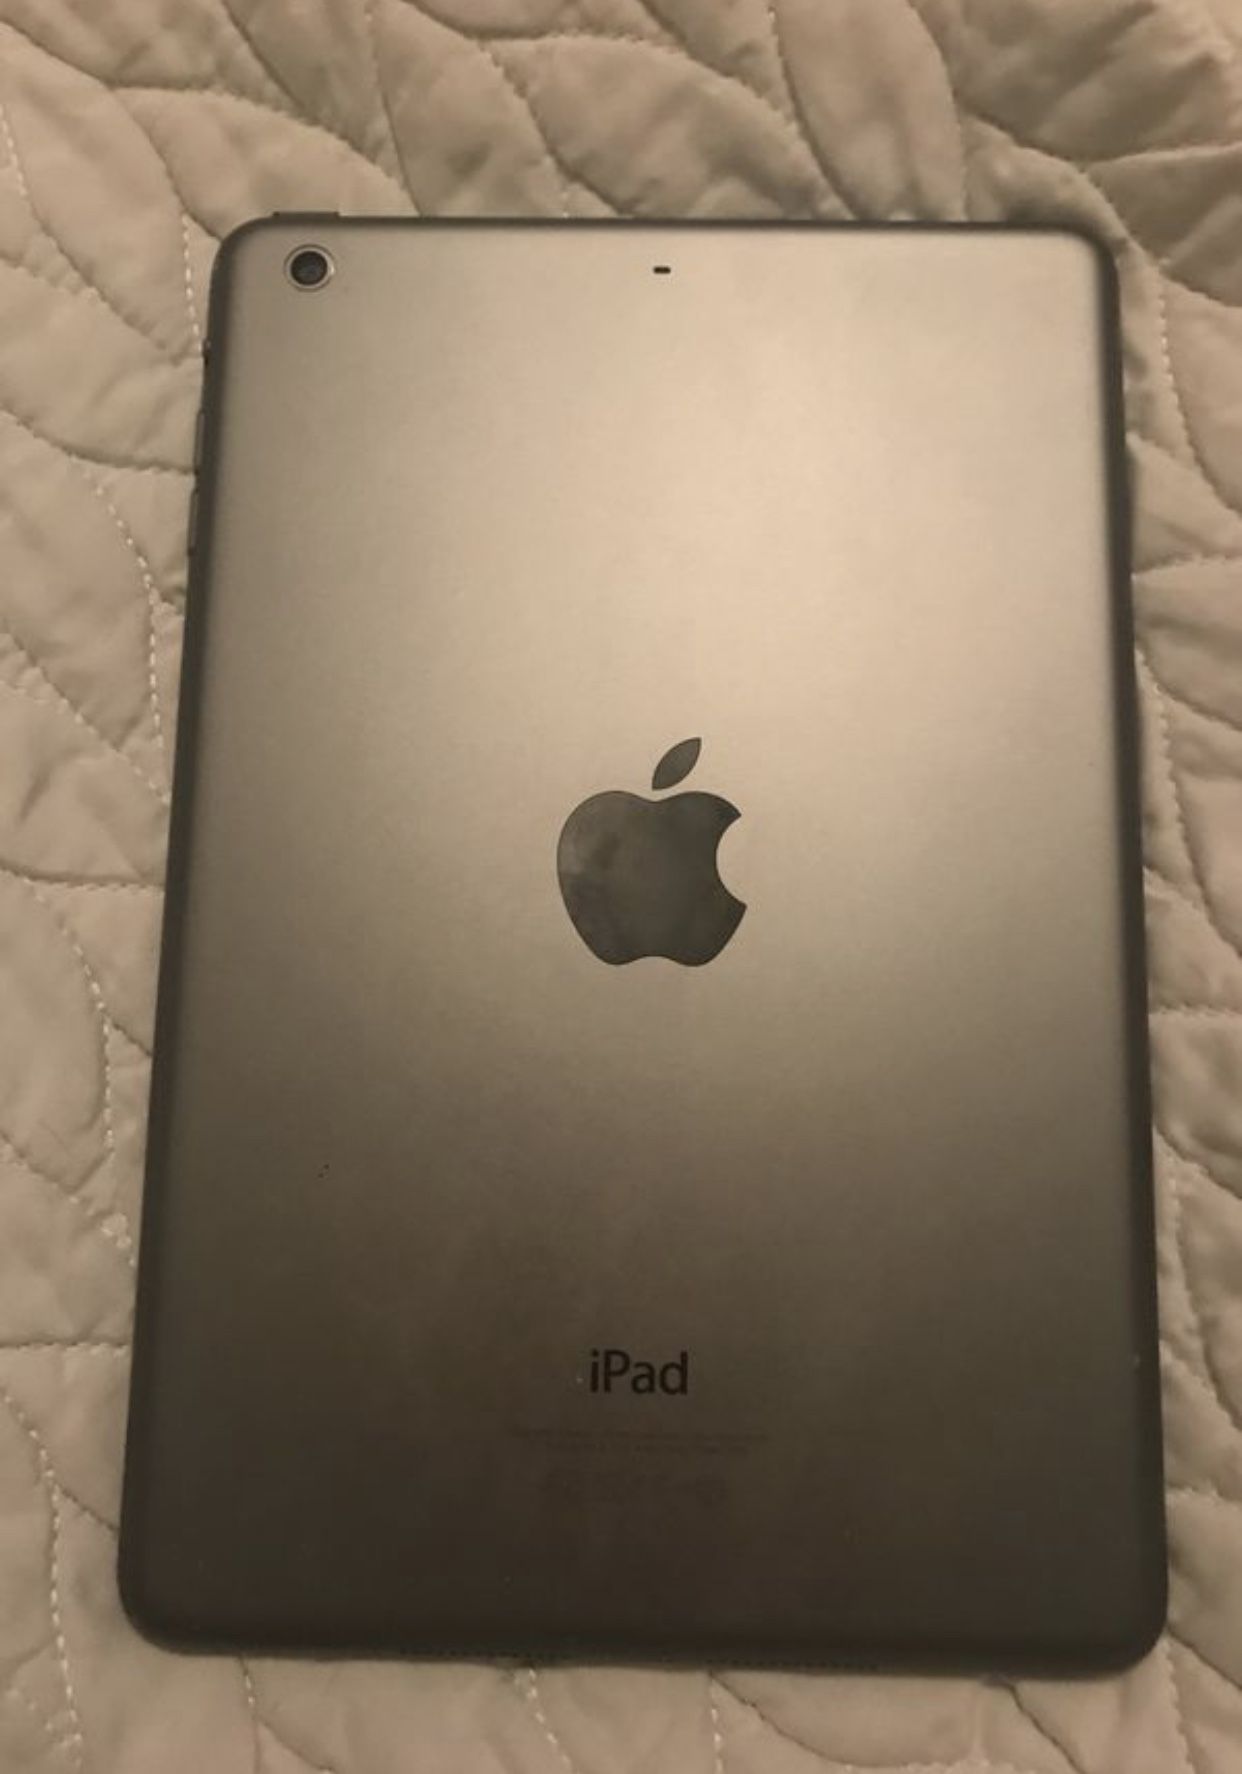 Ipad mini 2 excellent conditions LOCKED FOR PARTS ONLY. I ACCEPT TRADES